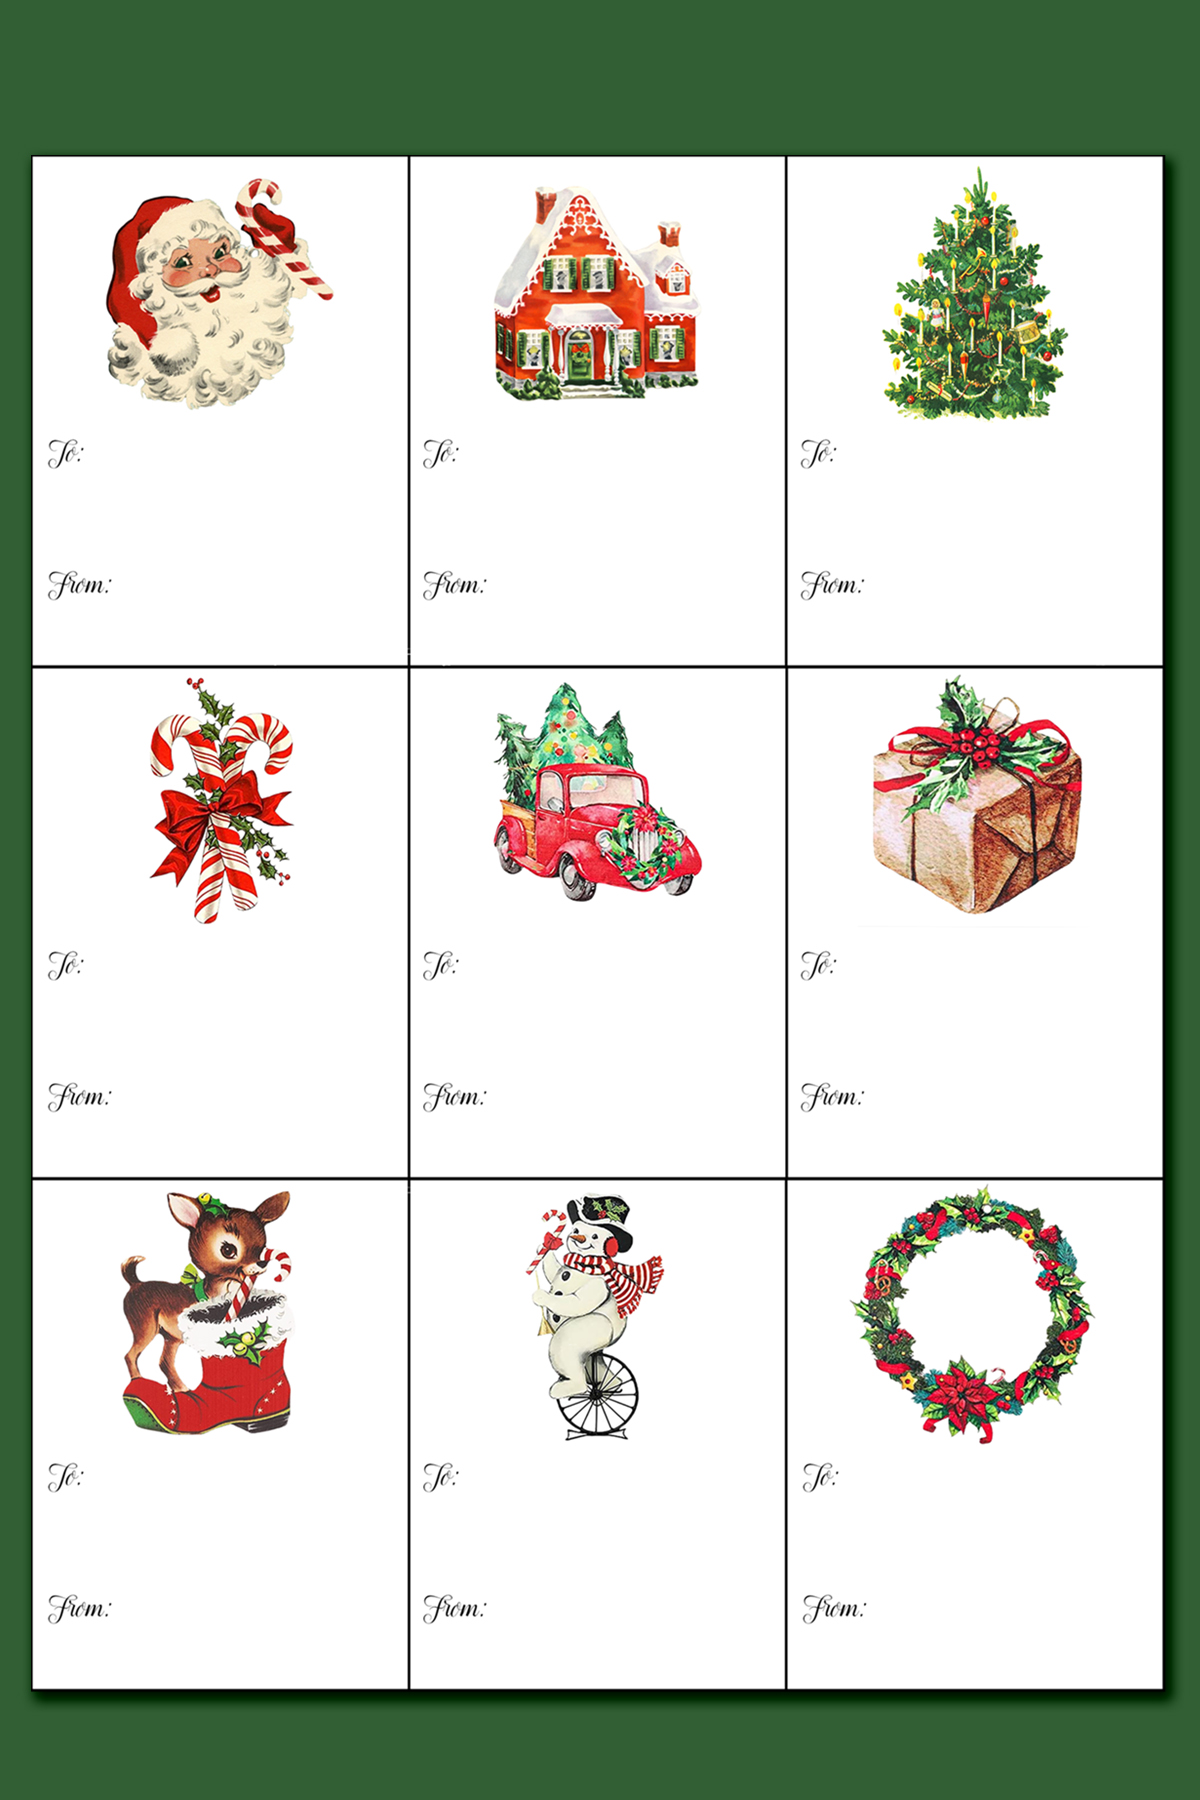 This image is showing the sheet of vintage Christmas tags you can get as part of the free printable Christmas labels for gifts set.